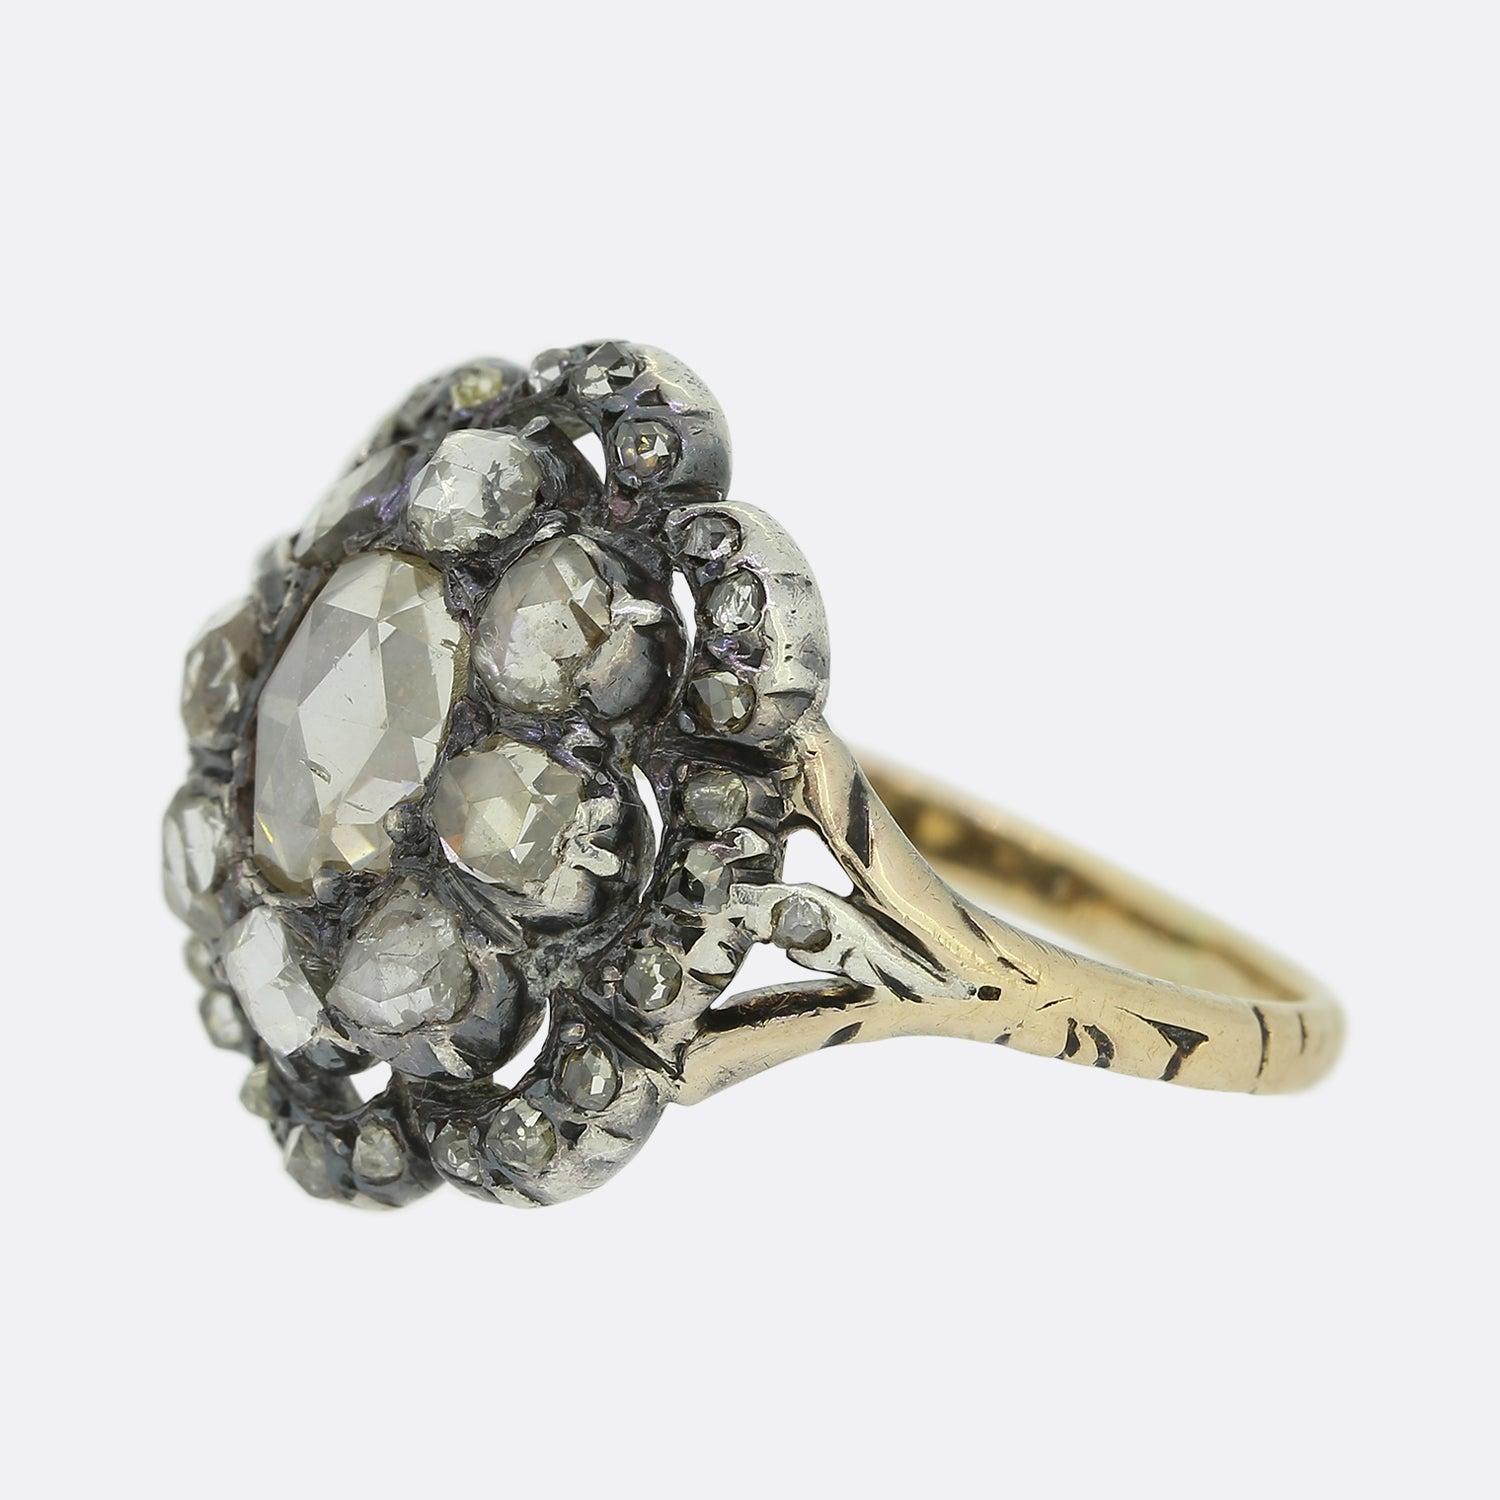 Here we have a wonderful example of Georgian craftsmanship. This multi-layered cluster ring features an oval shaped rose cut diamond at the centre which is circulated by a slightly smaller array of matching rose cut diamonds. Multiple convex motifs